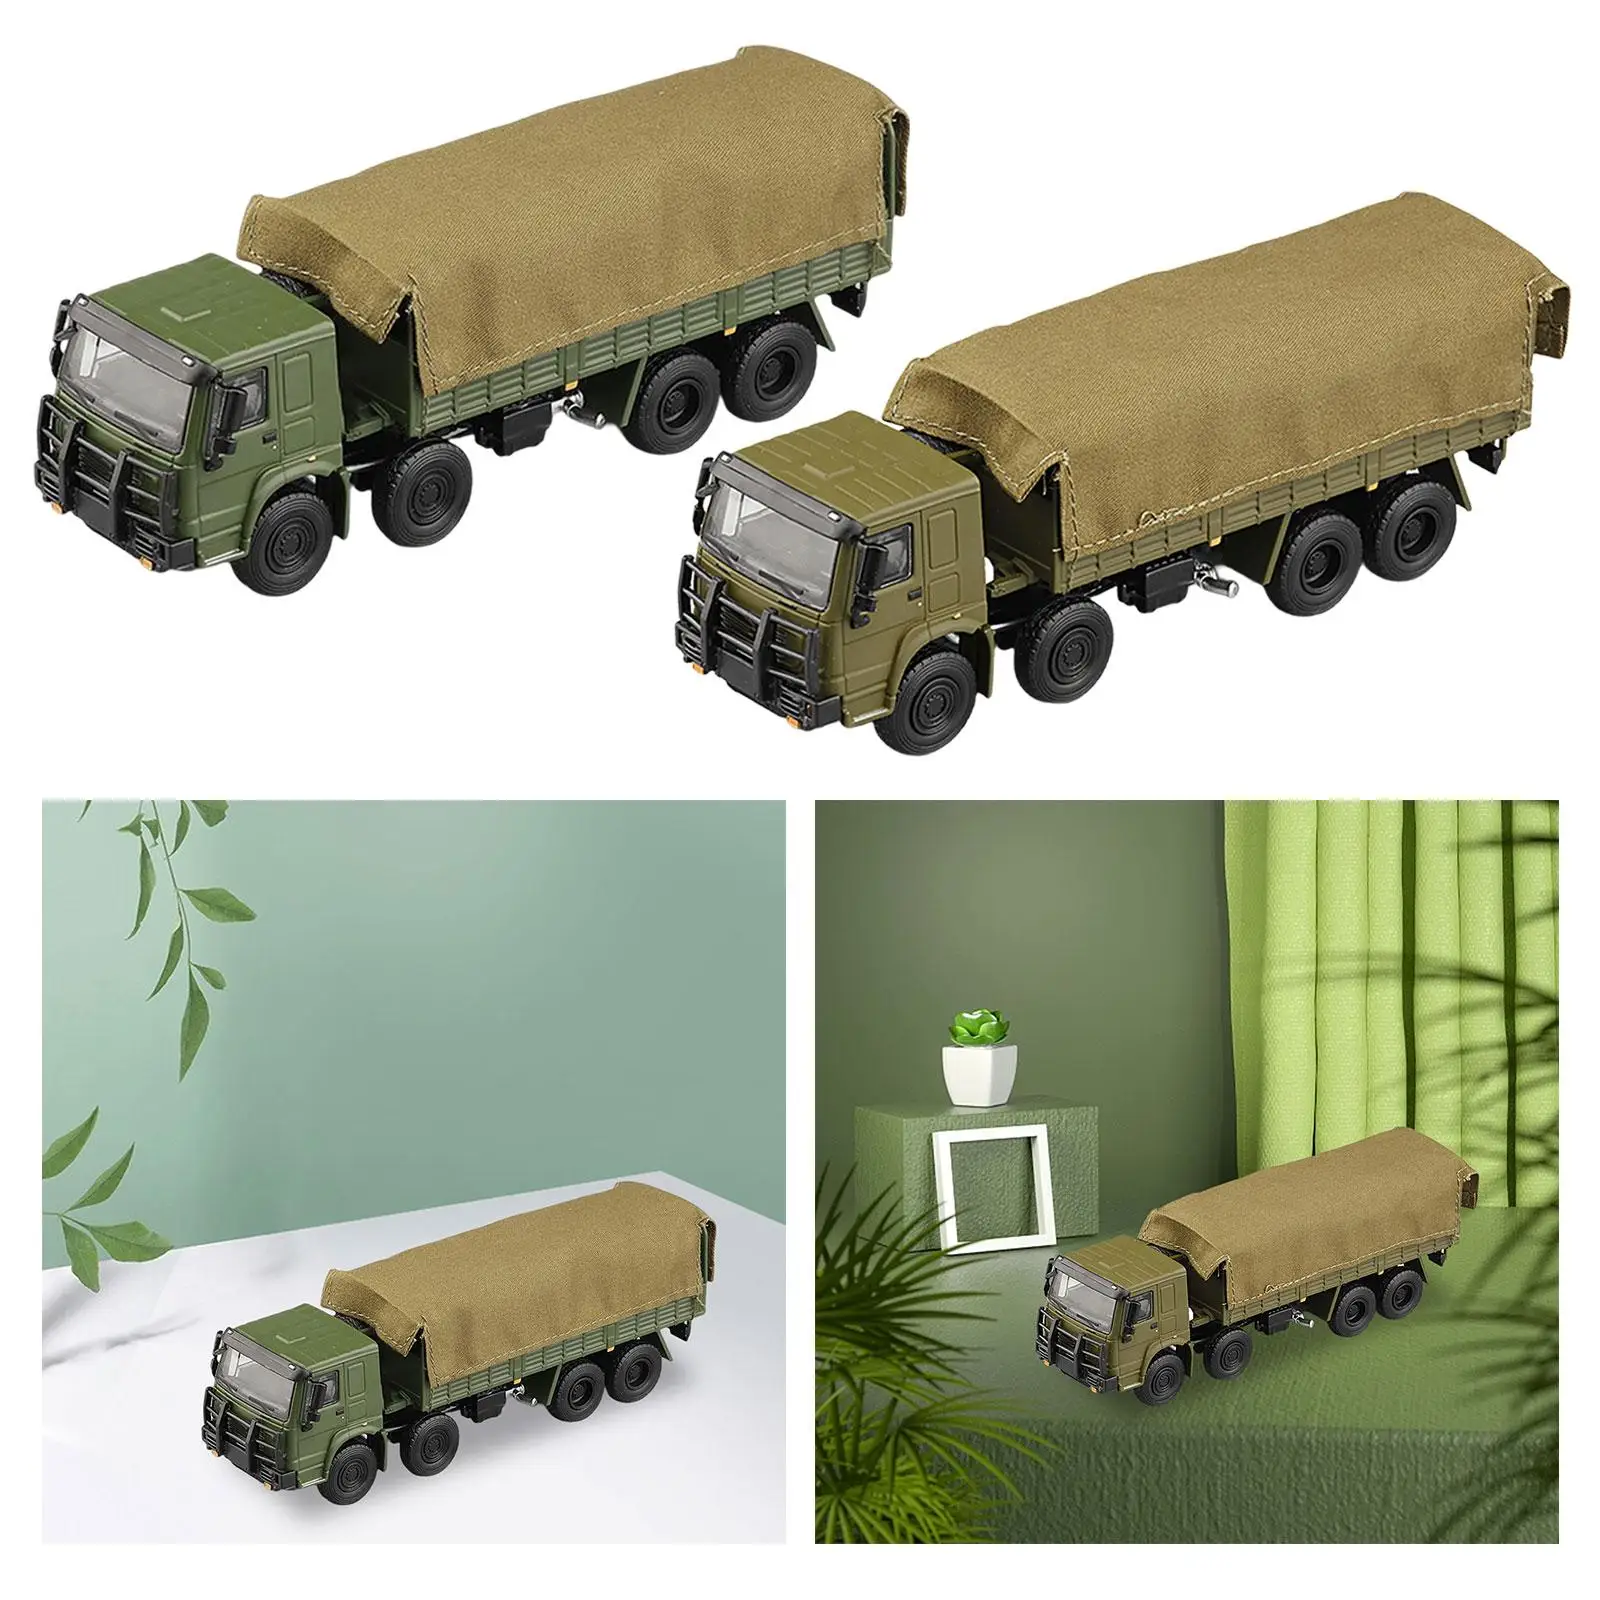 1/64 Car Model Desk Decoration Collectible Vehicles Alloy Car Model for Diorama Photography Props Micro Landscapes Accessories